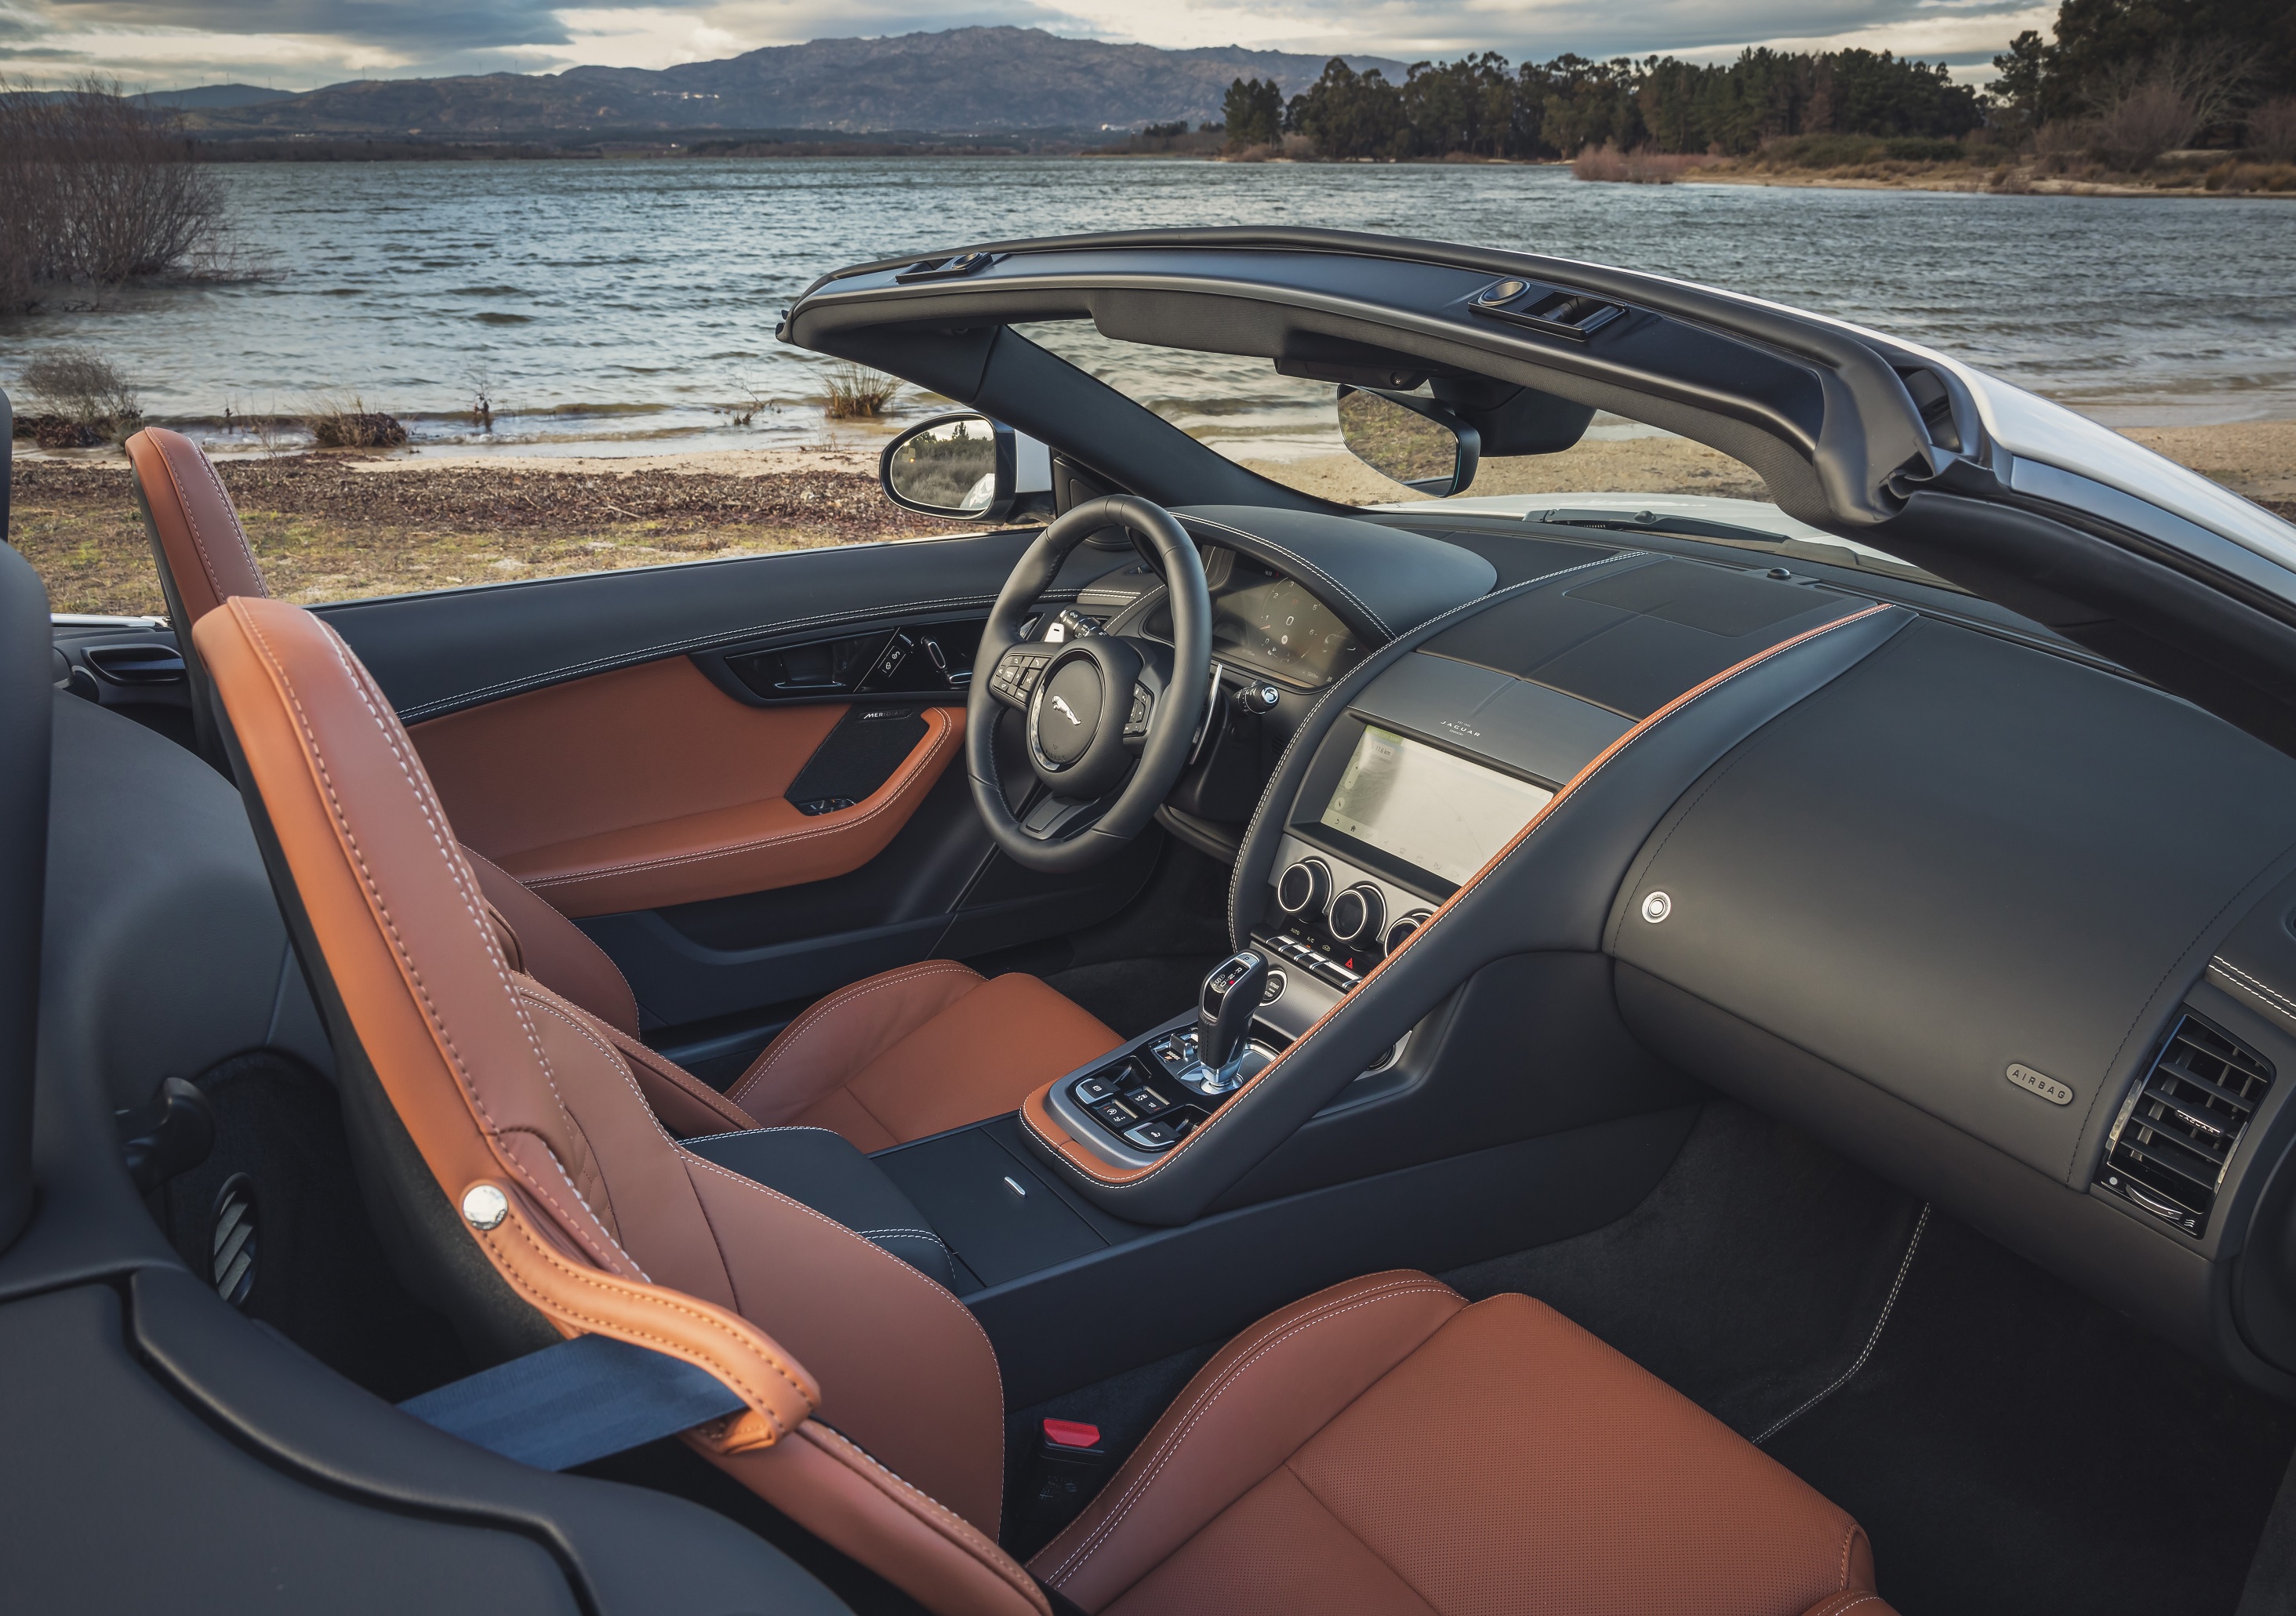 The brown-leather seats and black-leather dashboard of a 2022 Jaguar F-Type Convertible P450 next to a mountain lake